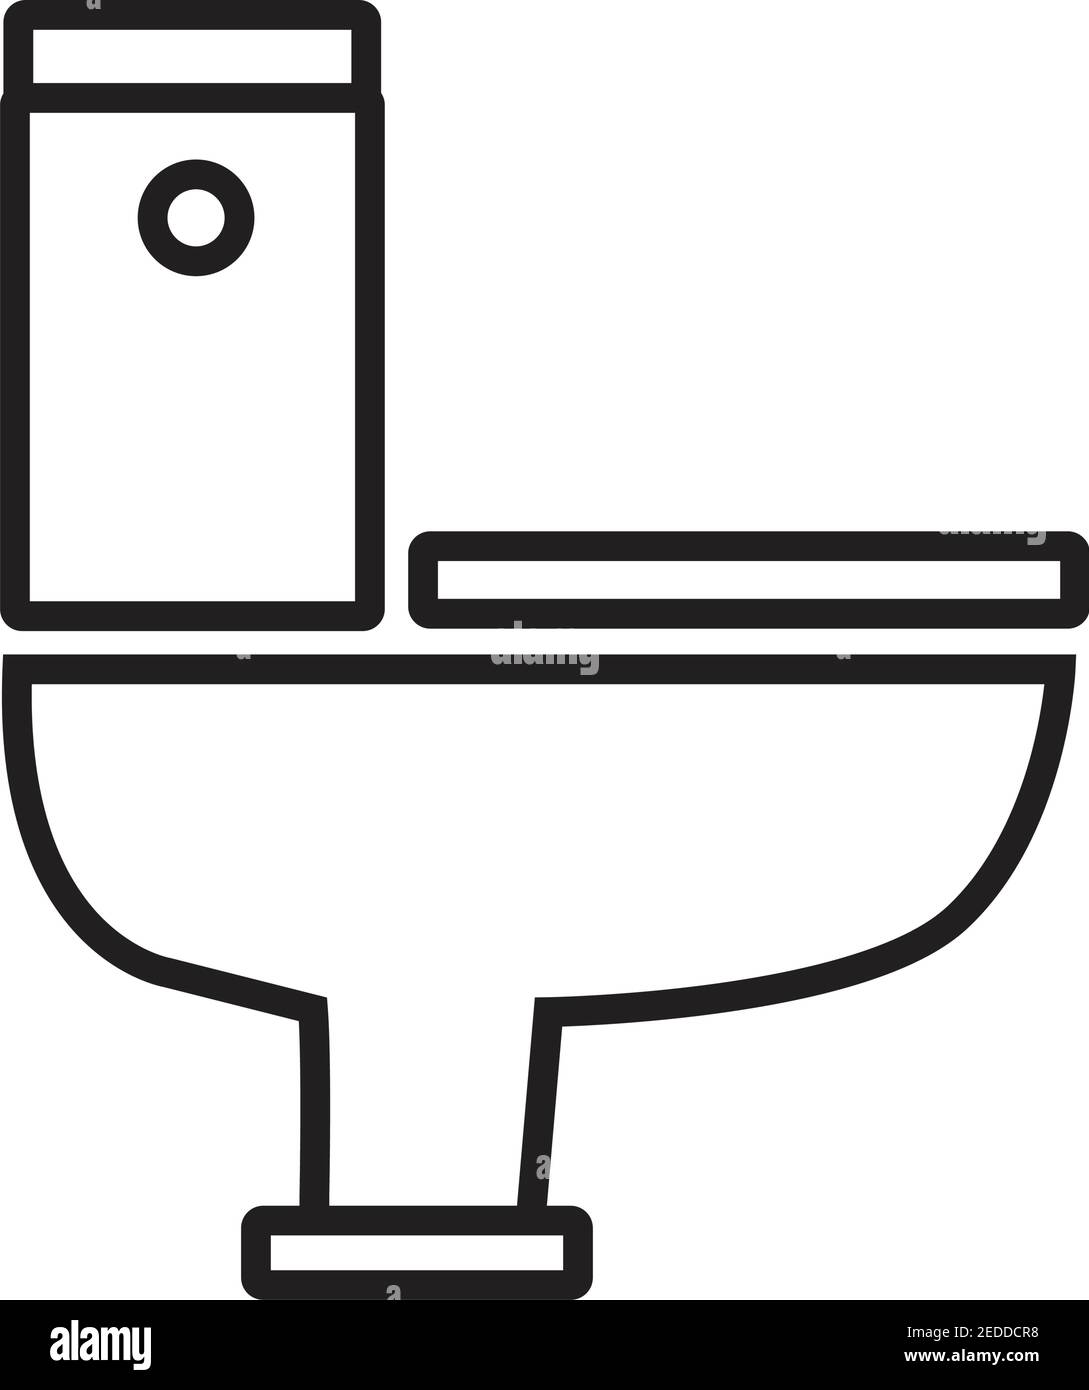 Toilet line icon vector illustration isolated on white background eps 10 Stock Vector